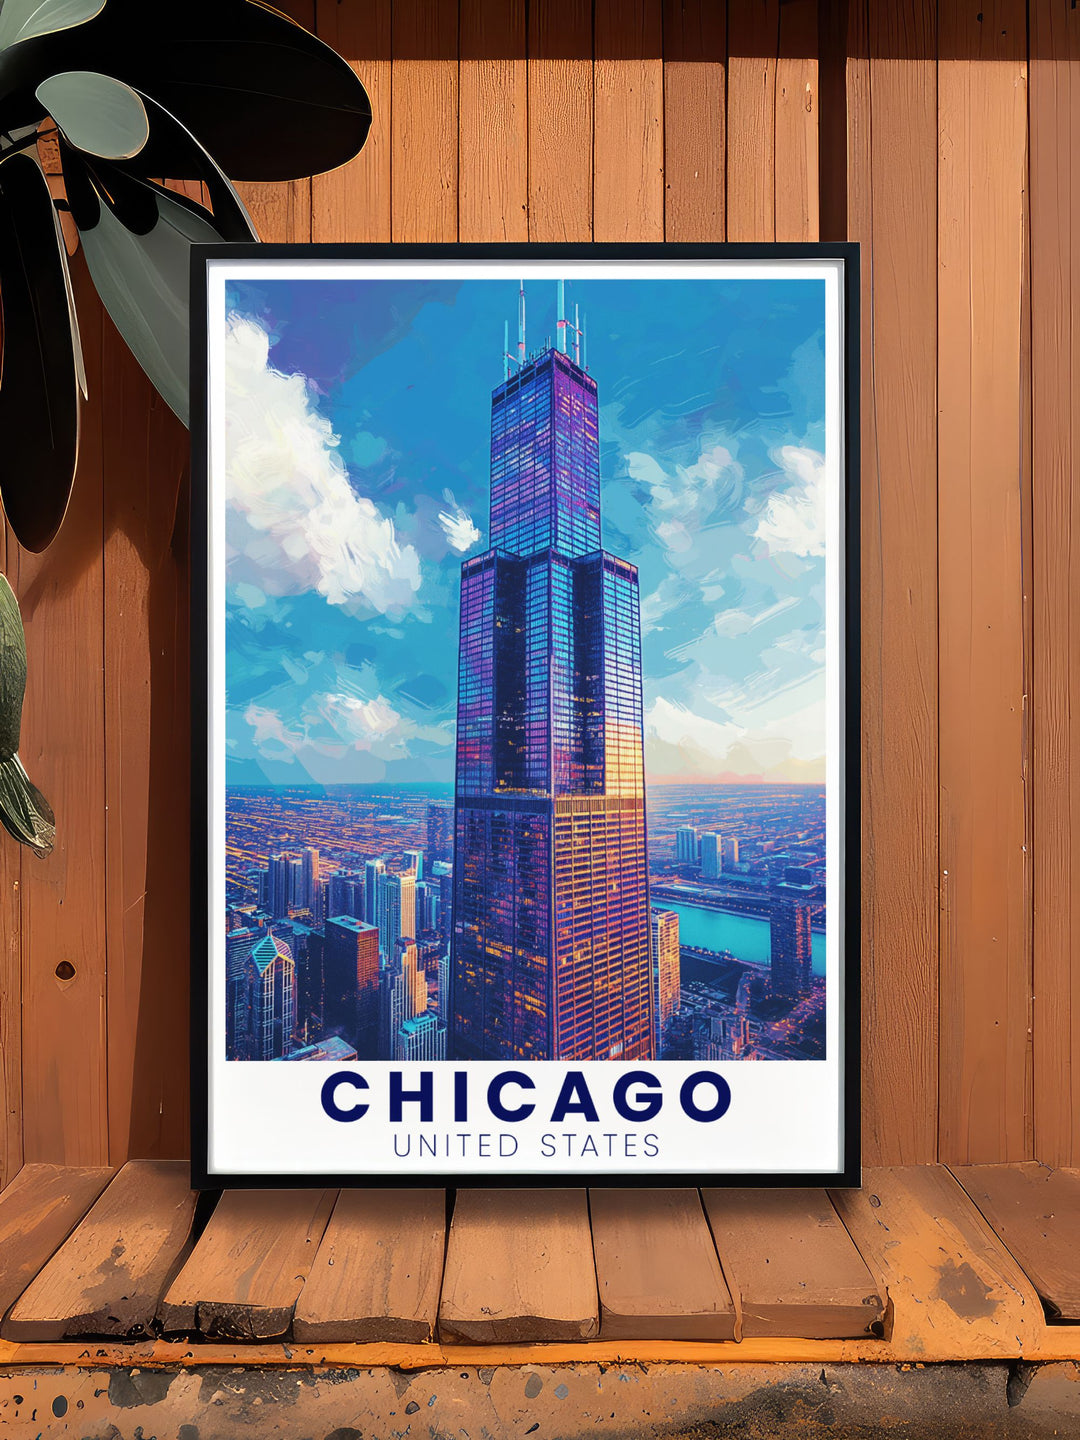 A captivating Chicago skyline poster with Willis Tower offering a blend of urban and historic elements perfect for travel posters and personalized Chicago gifts.